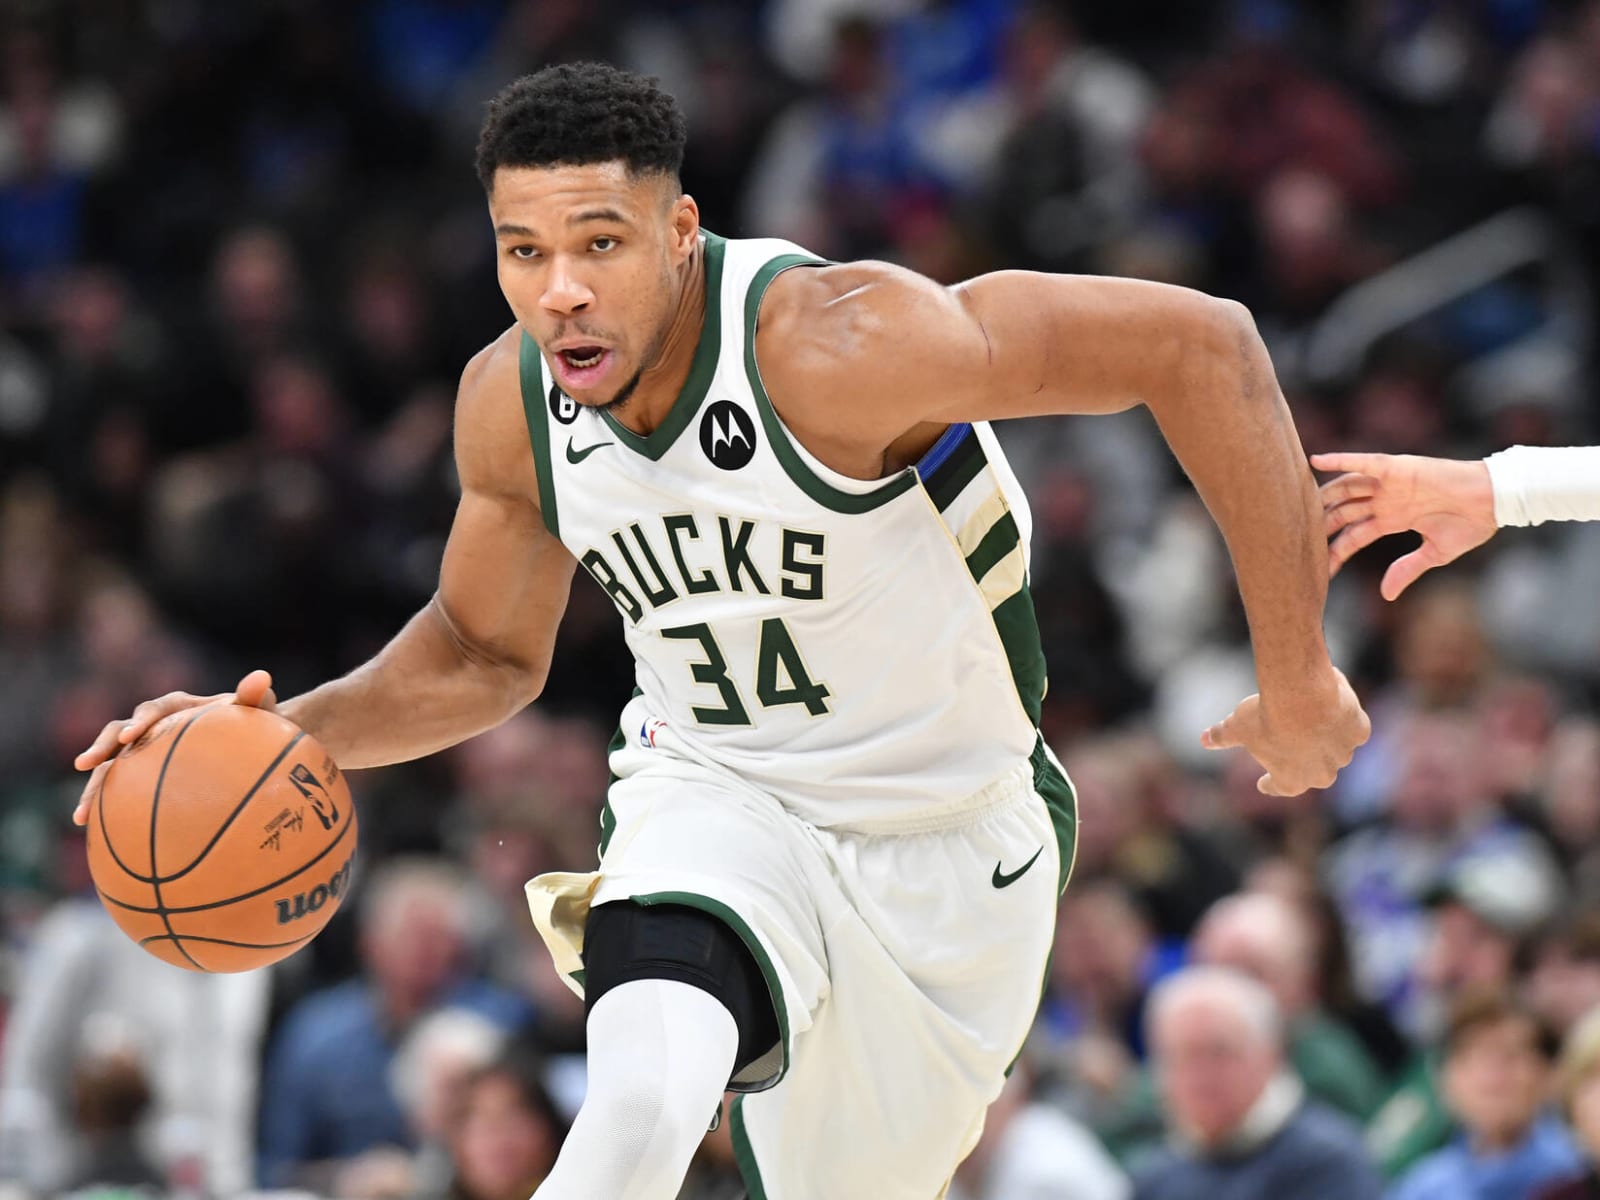 New No Dunks! Giannis Antetokounmpo's career-high 55 points, whether  De'Aaron Fox and Domantas Sabonis will both be selected to the…